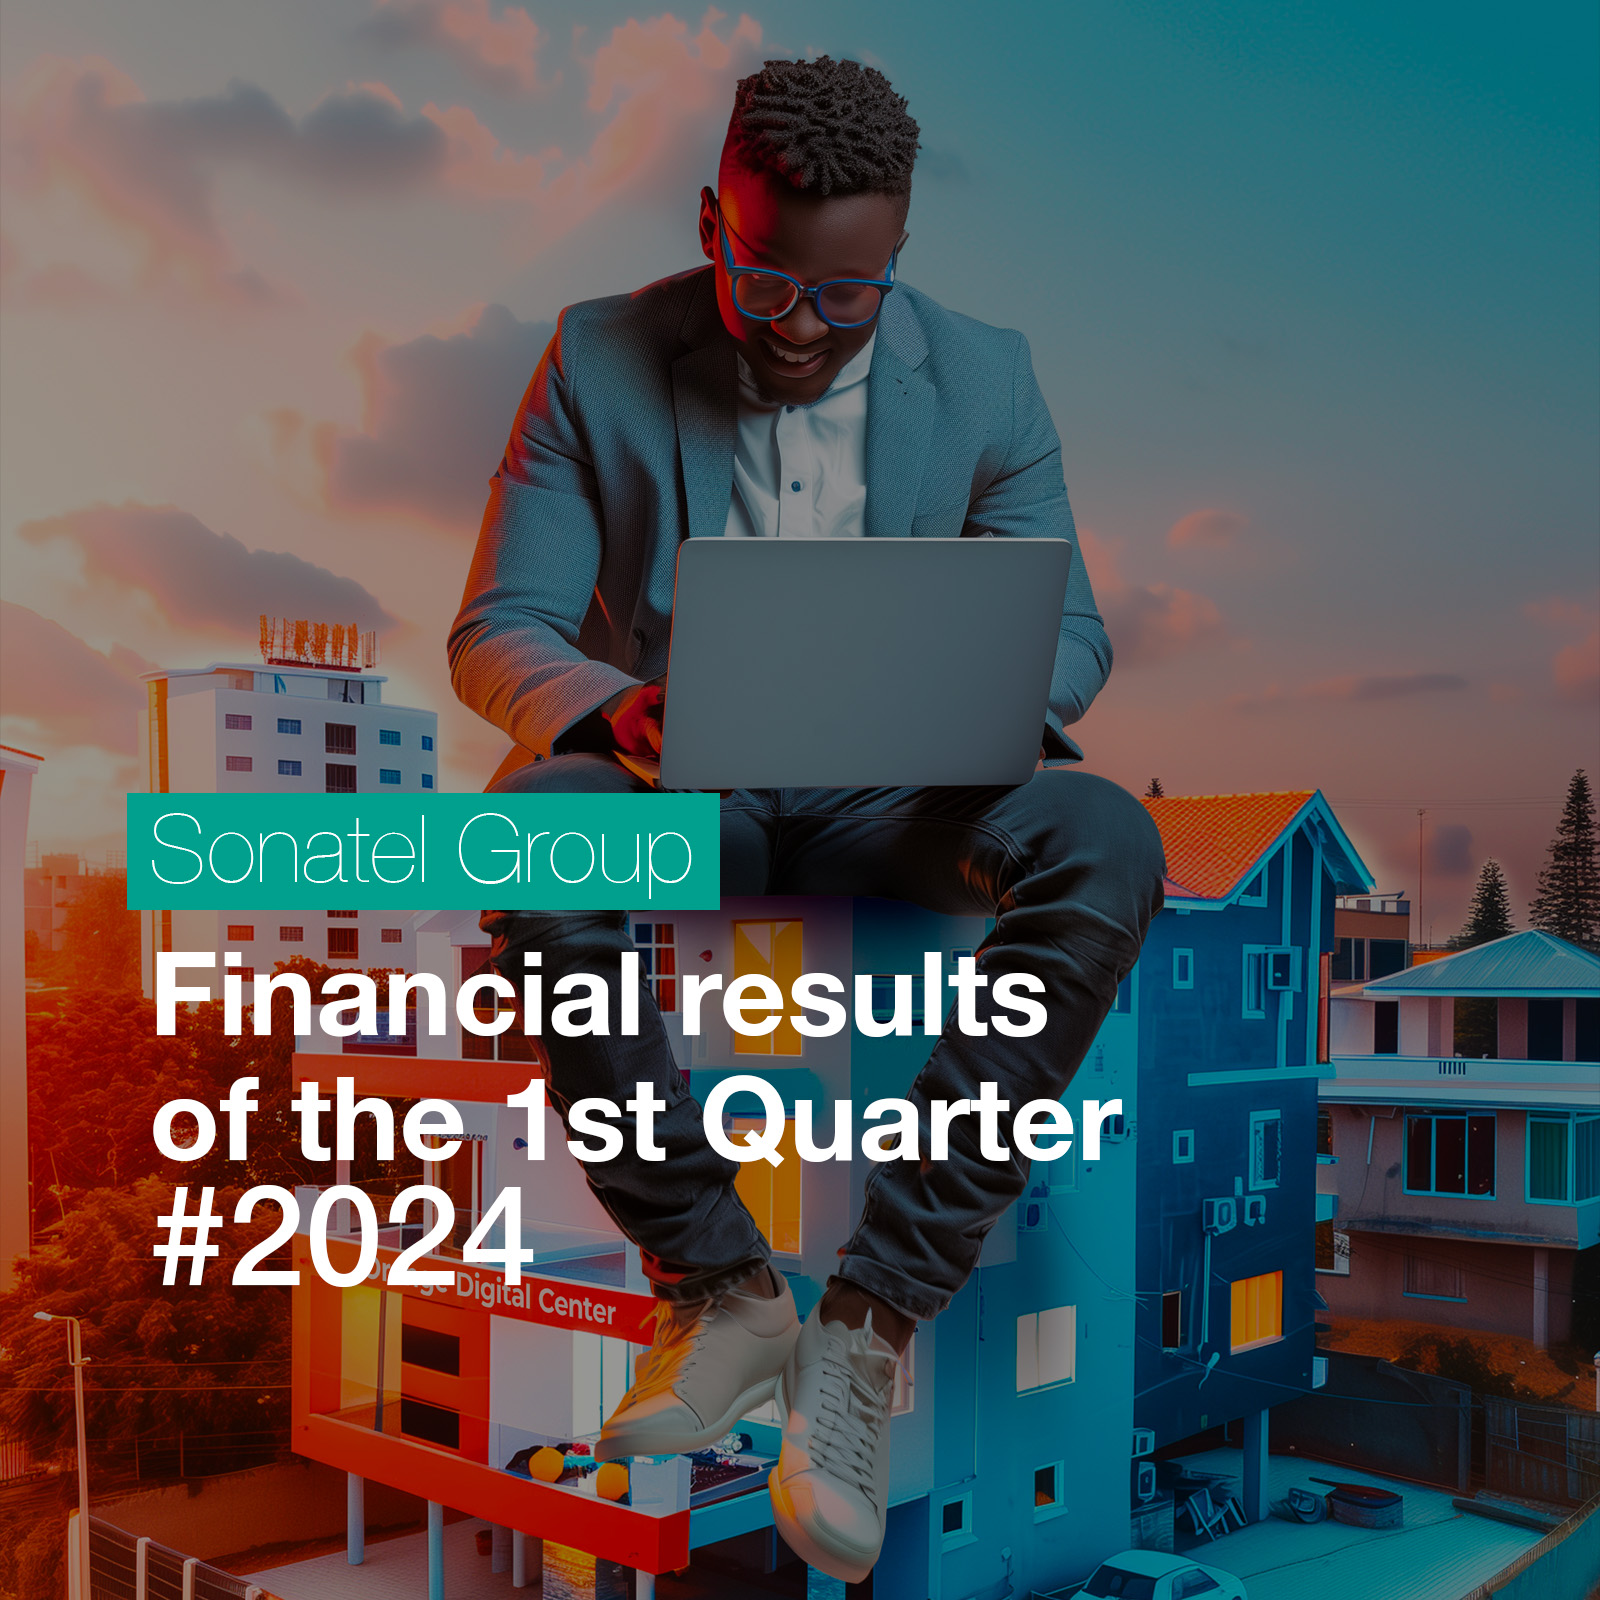 Financial results of the Sonatel group for the 1st Quarter of 2024